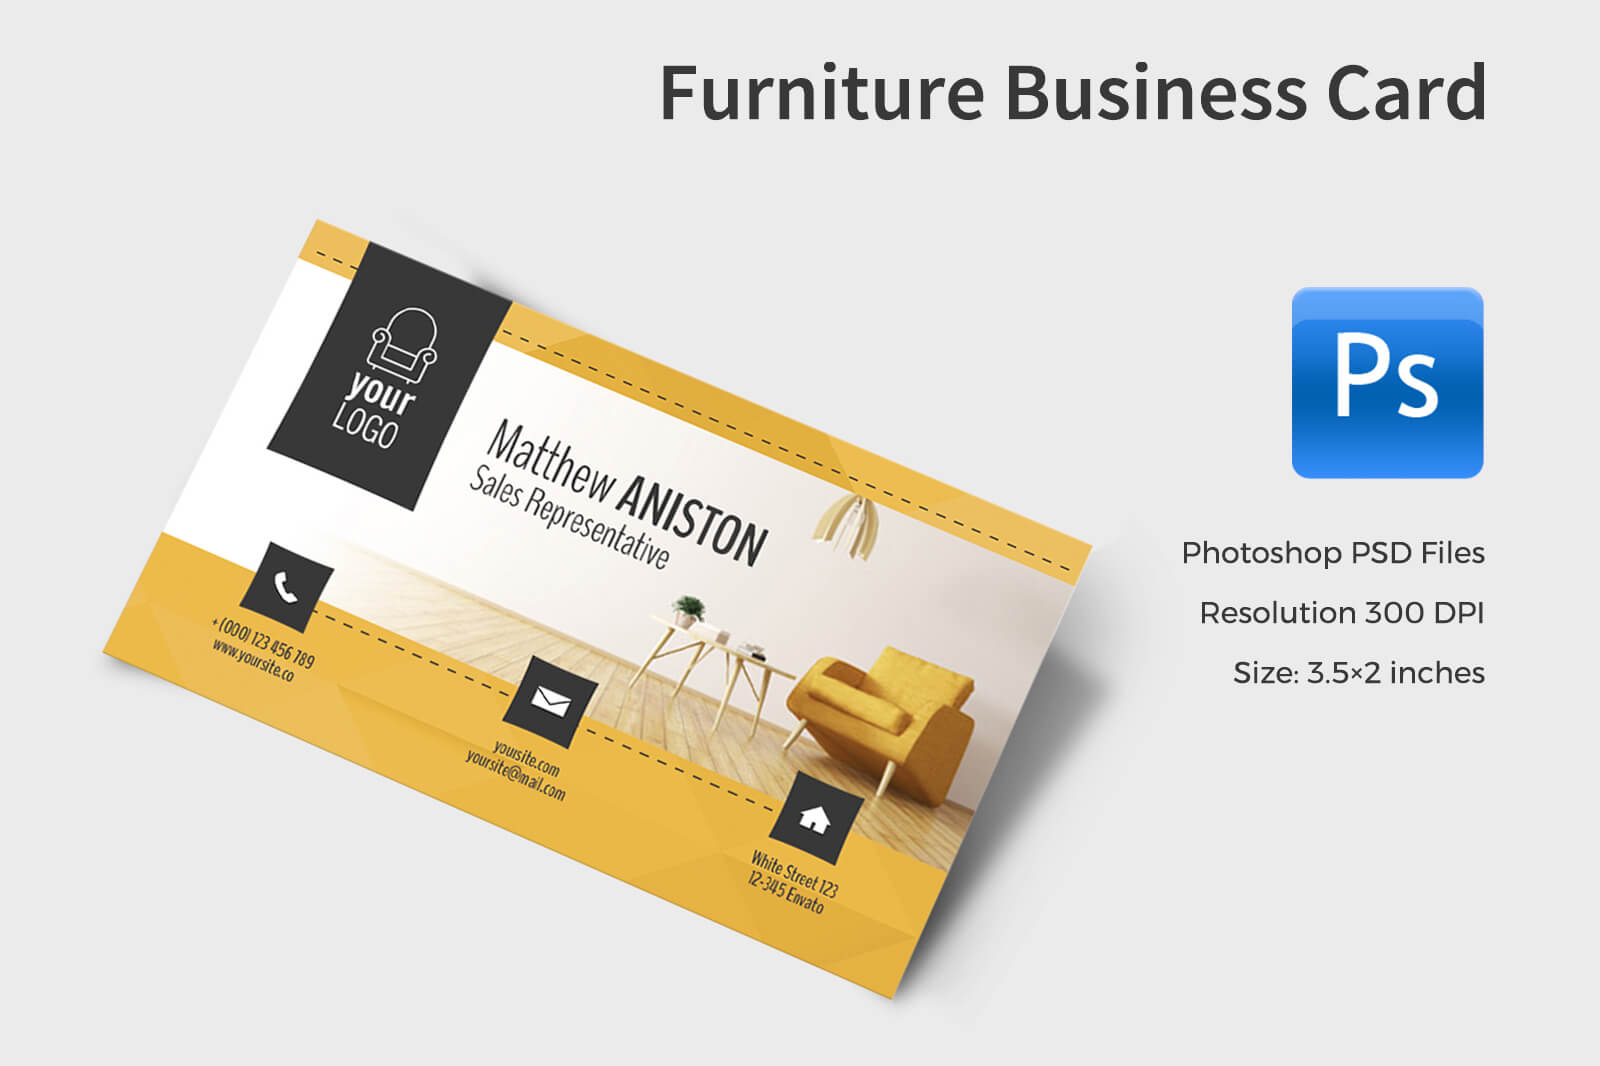 Furniture Business Card In Business Card Templates On Pertaining To Business Card Template Size Photoshop